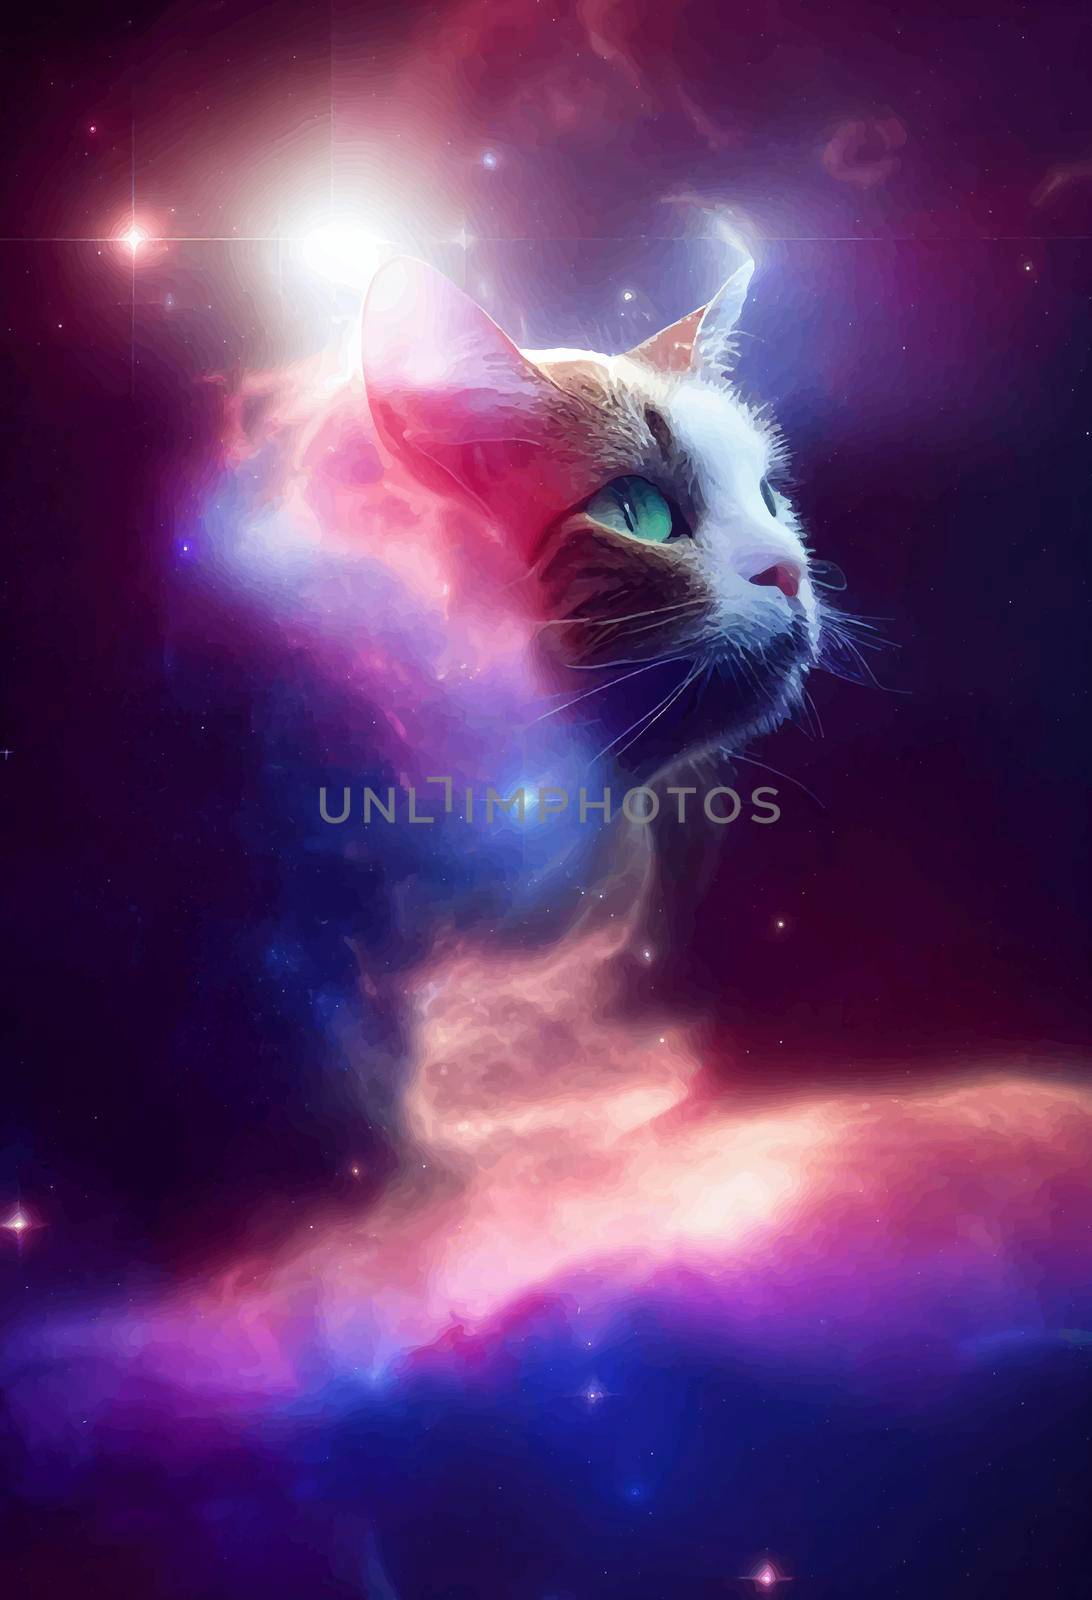 Cat astronaut in space, nebula and galaxies in space by JpRamos